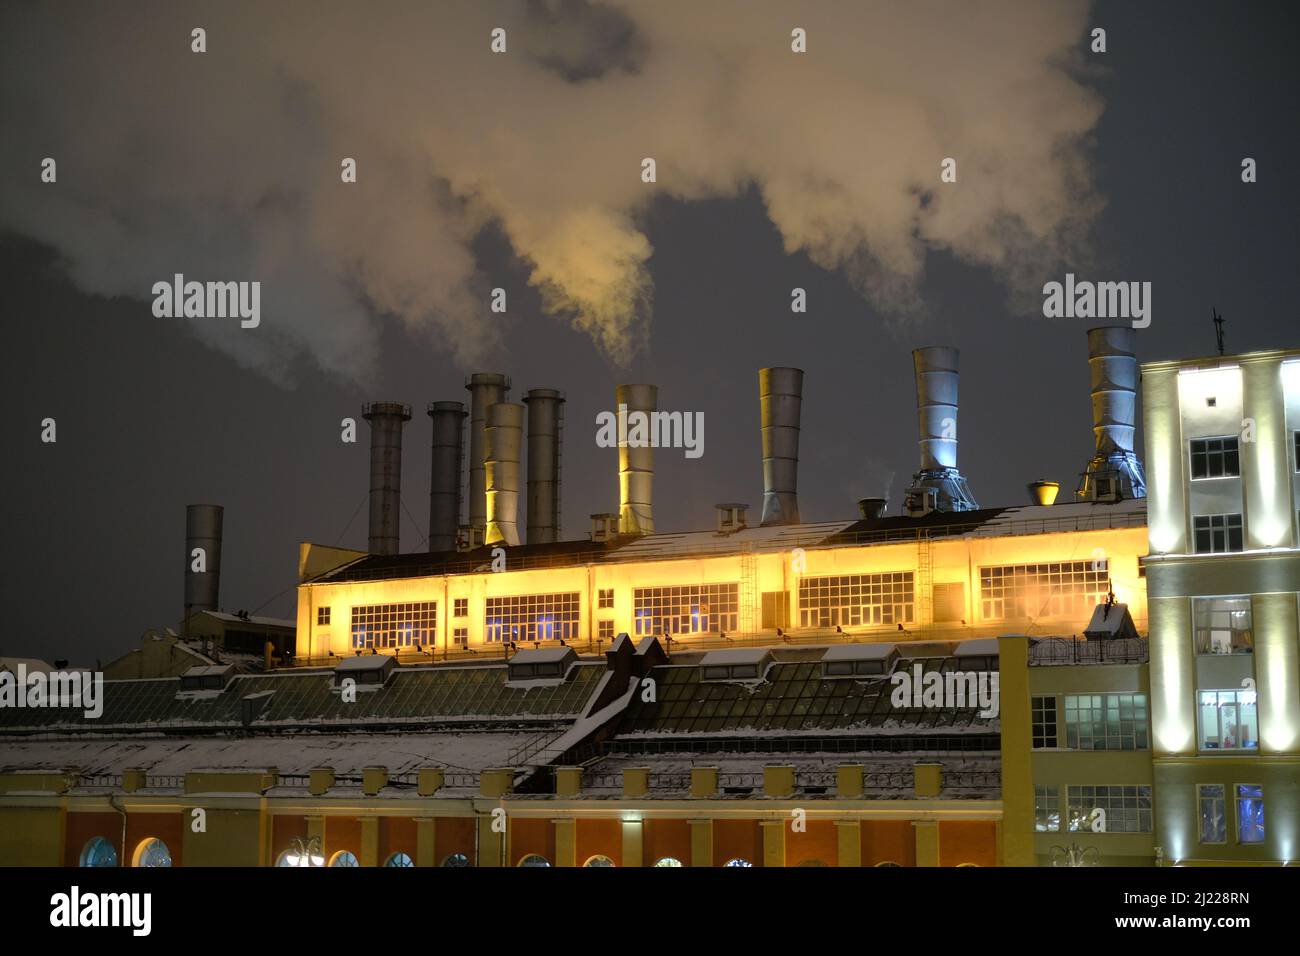 The view of the smoke coming from the factory chimneys. Stock Photo